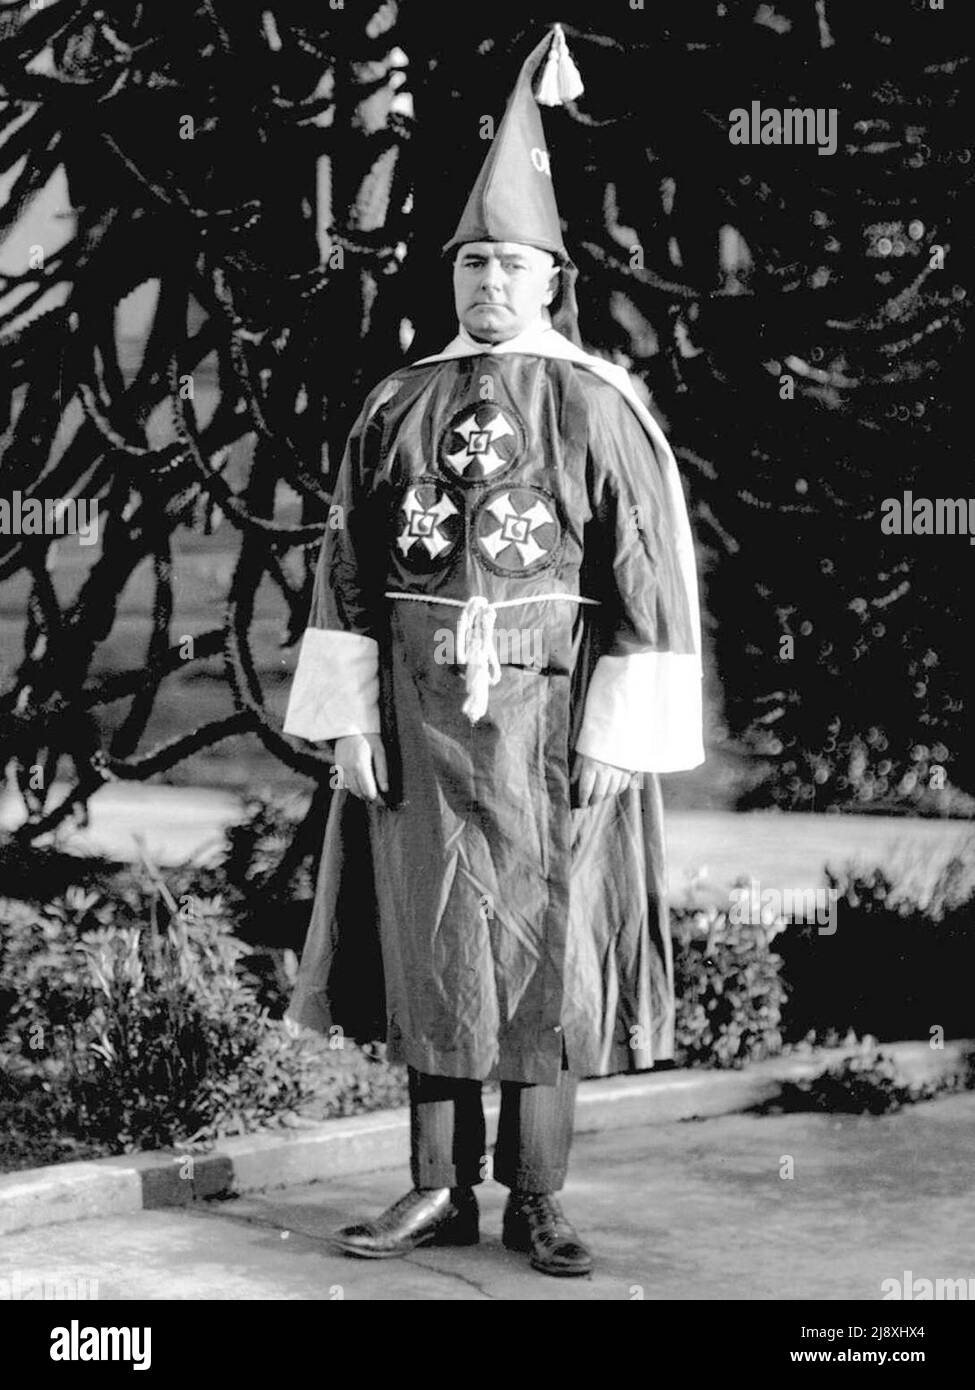 R.G. Wallace, Imperial Wizard of British Columbia, Kanadian Knights of the Ku Klux Klan, in 1925 Stock Photo